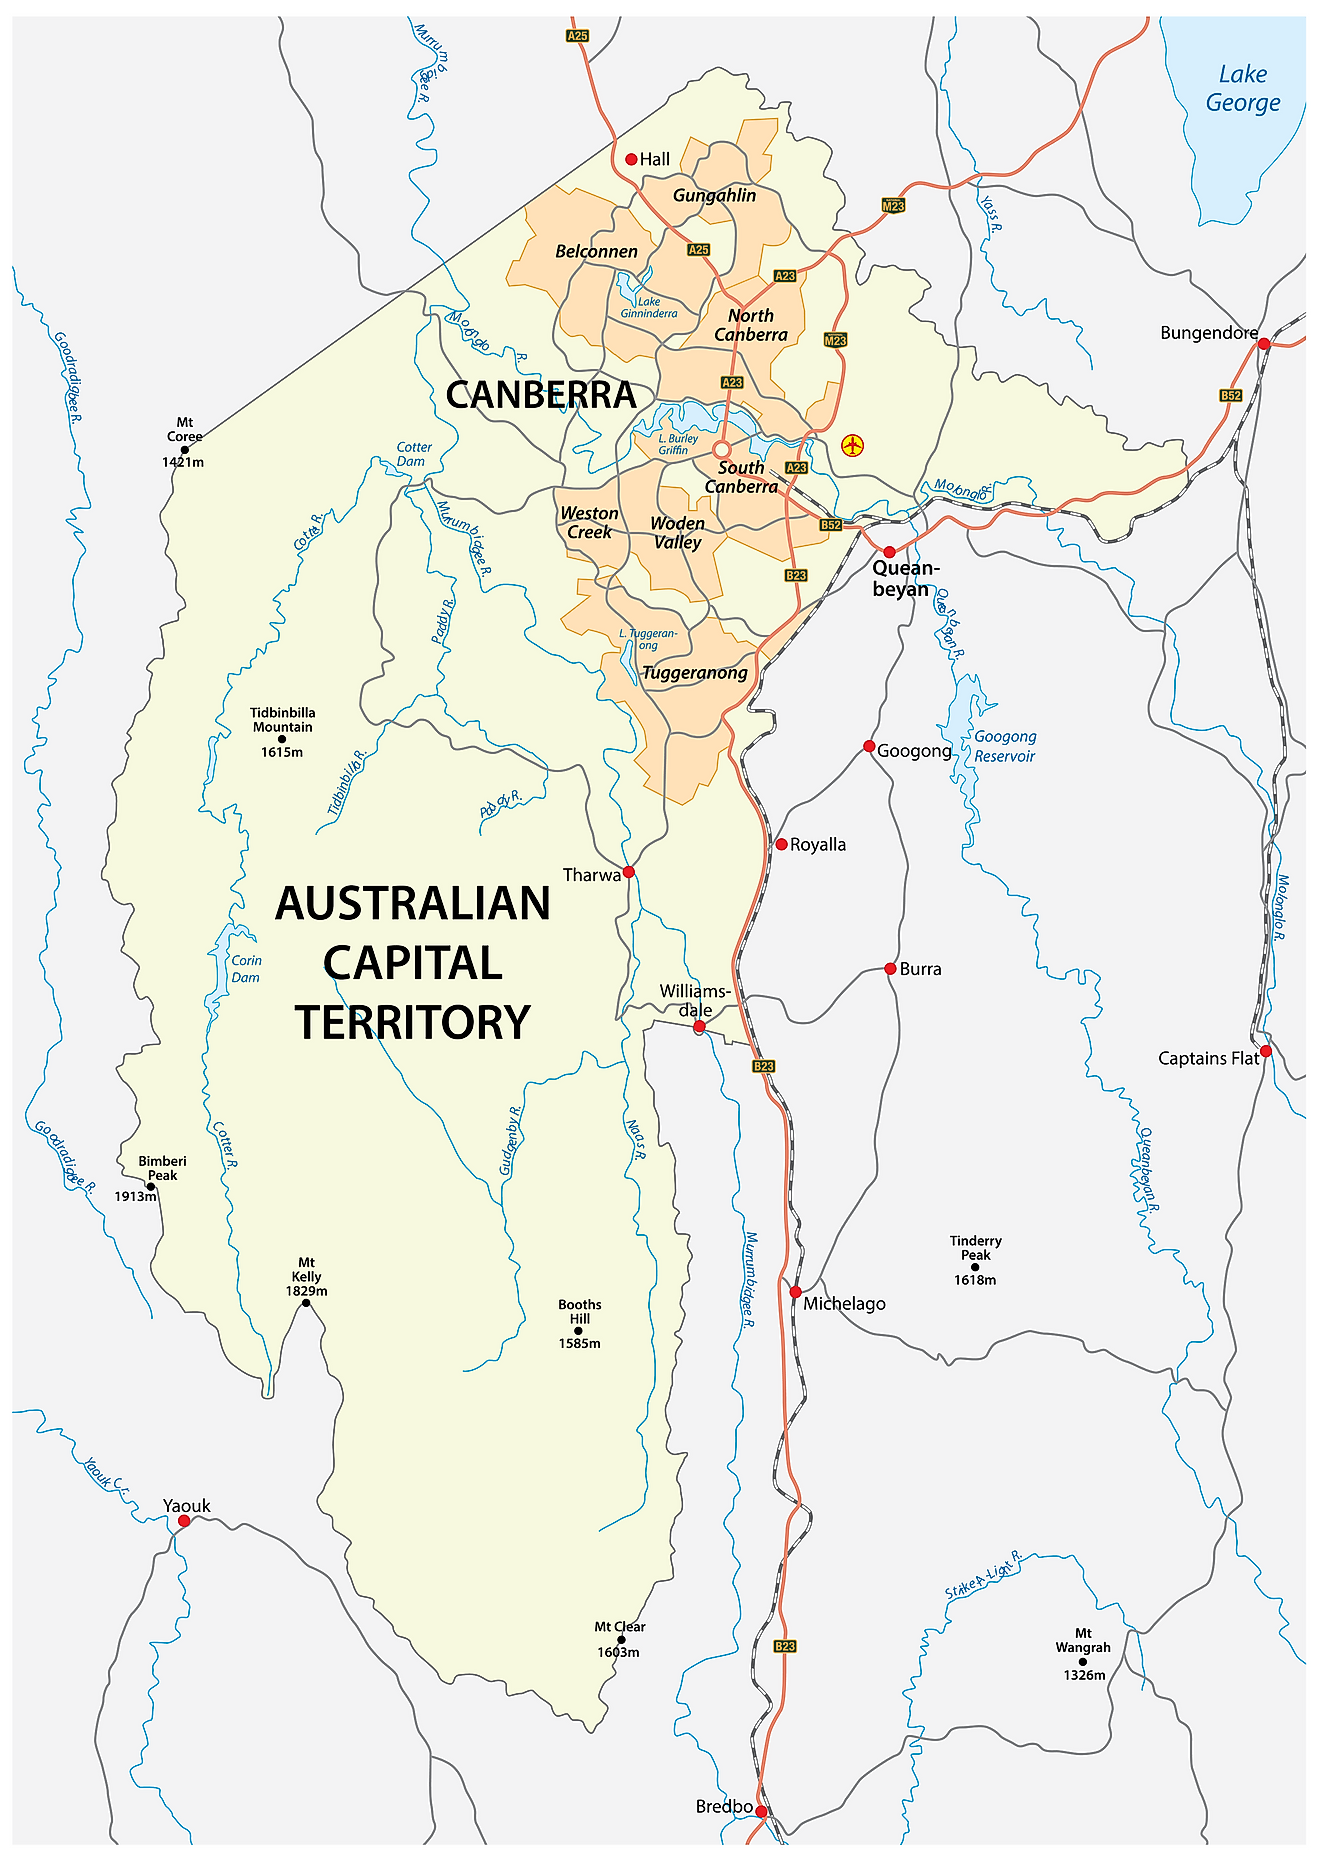 Map of Australian Capital Territory showing its various settlements and its capital city - Canberra